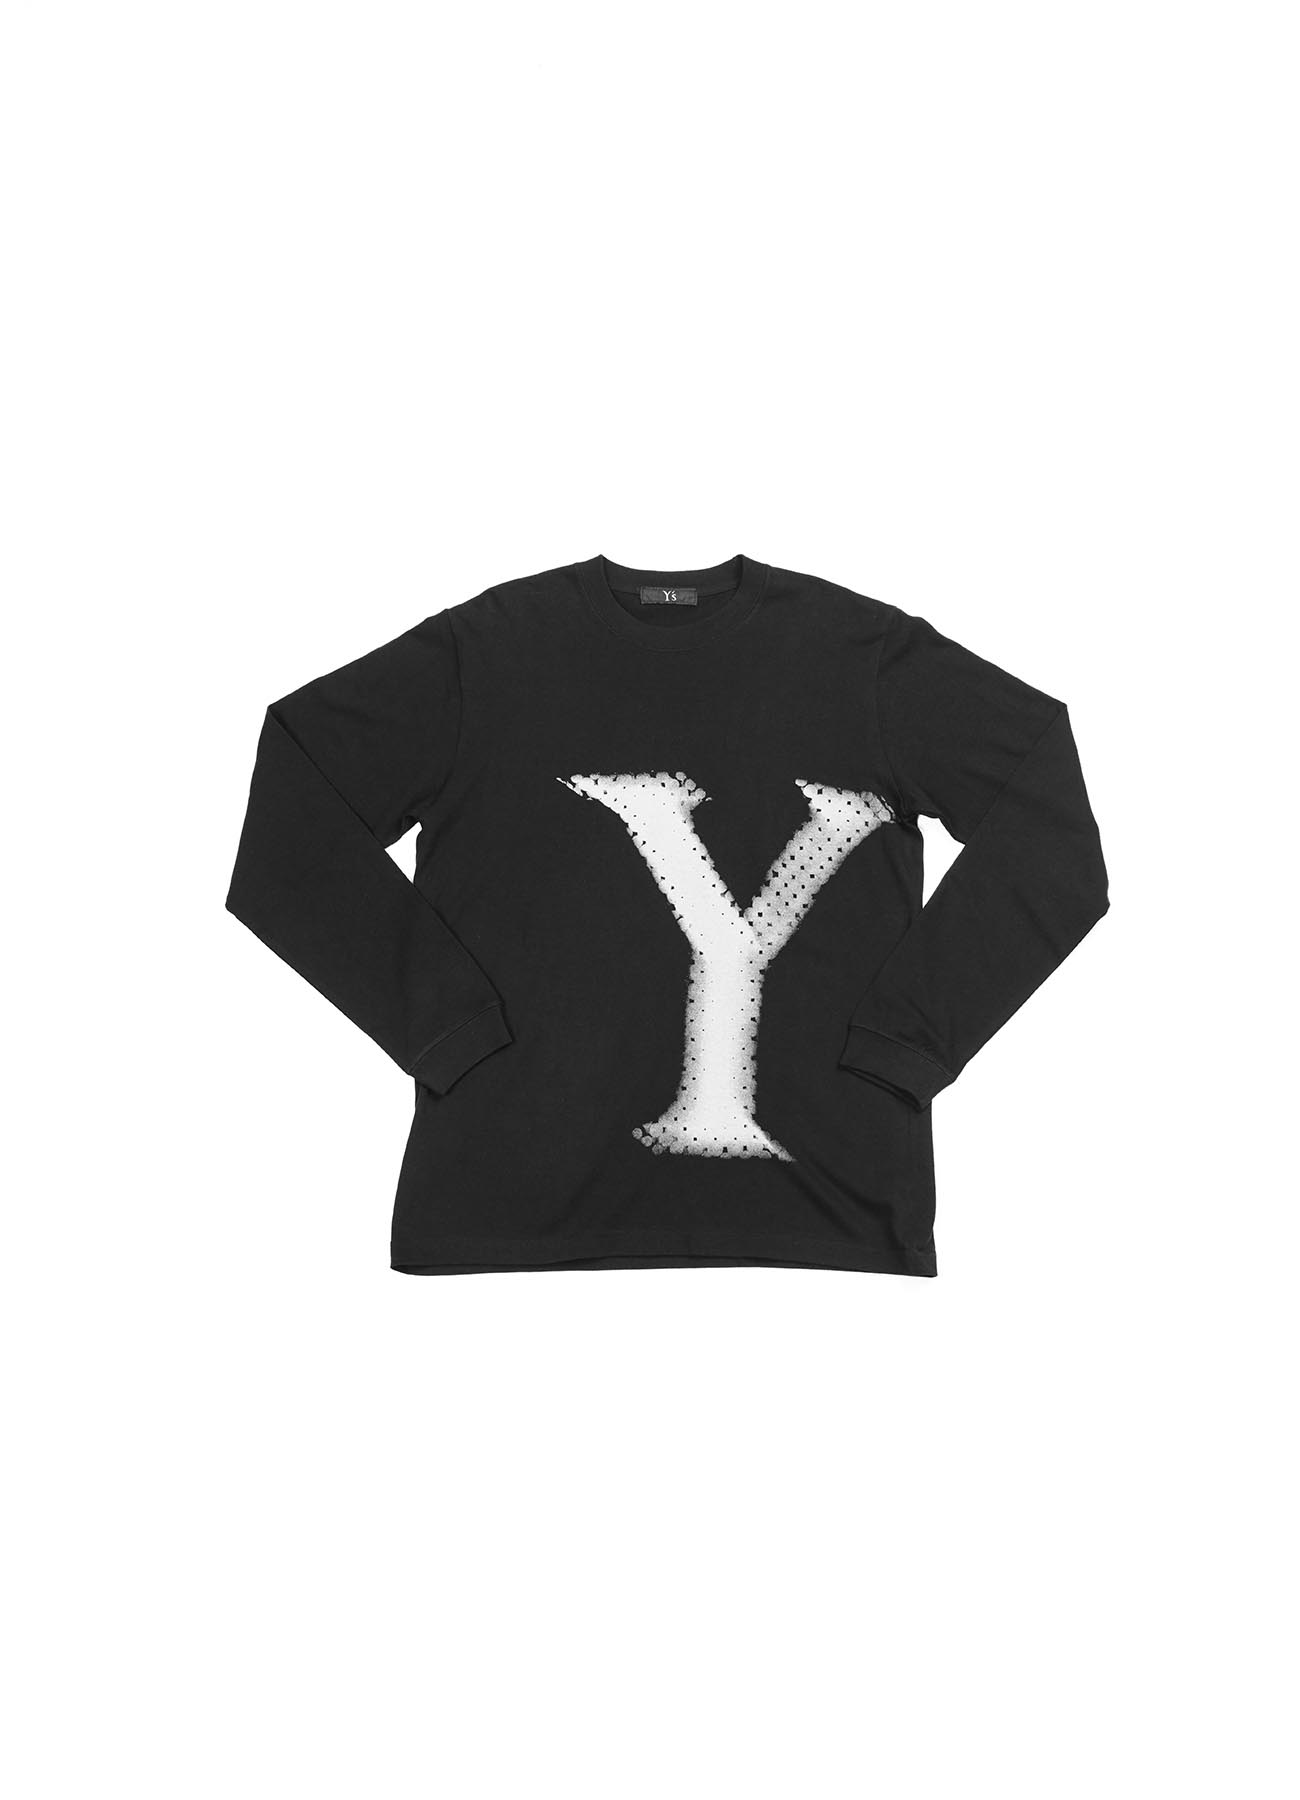 -Online EXCLUSIVE- Y's Big logo Long sleeve T-shirts